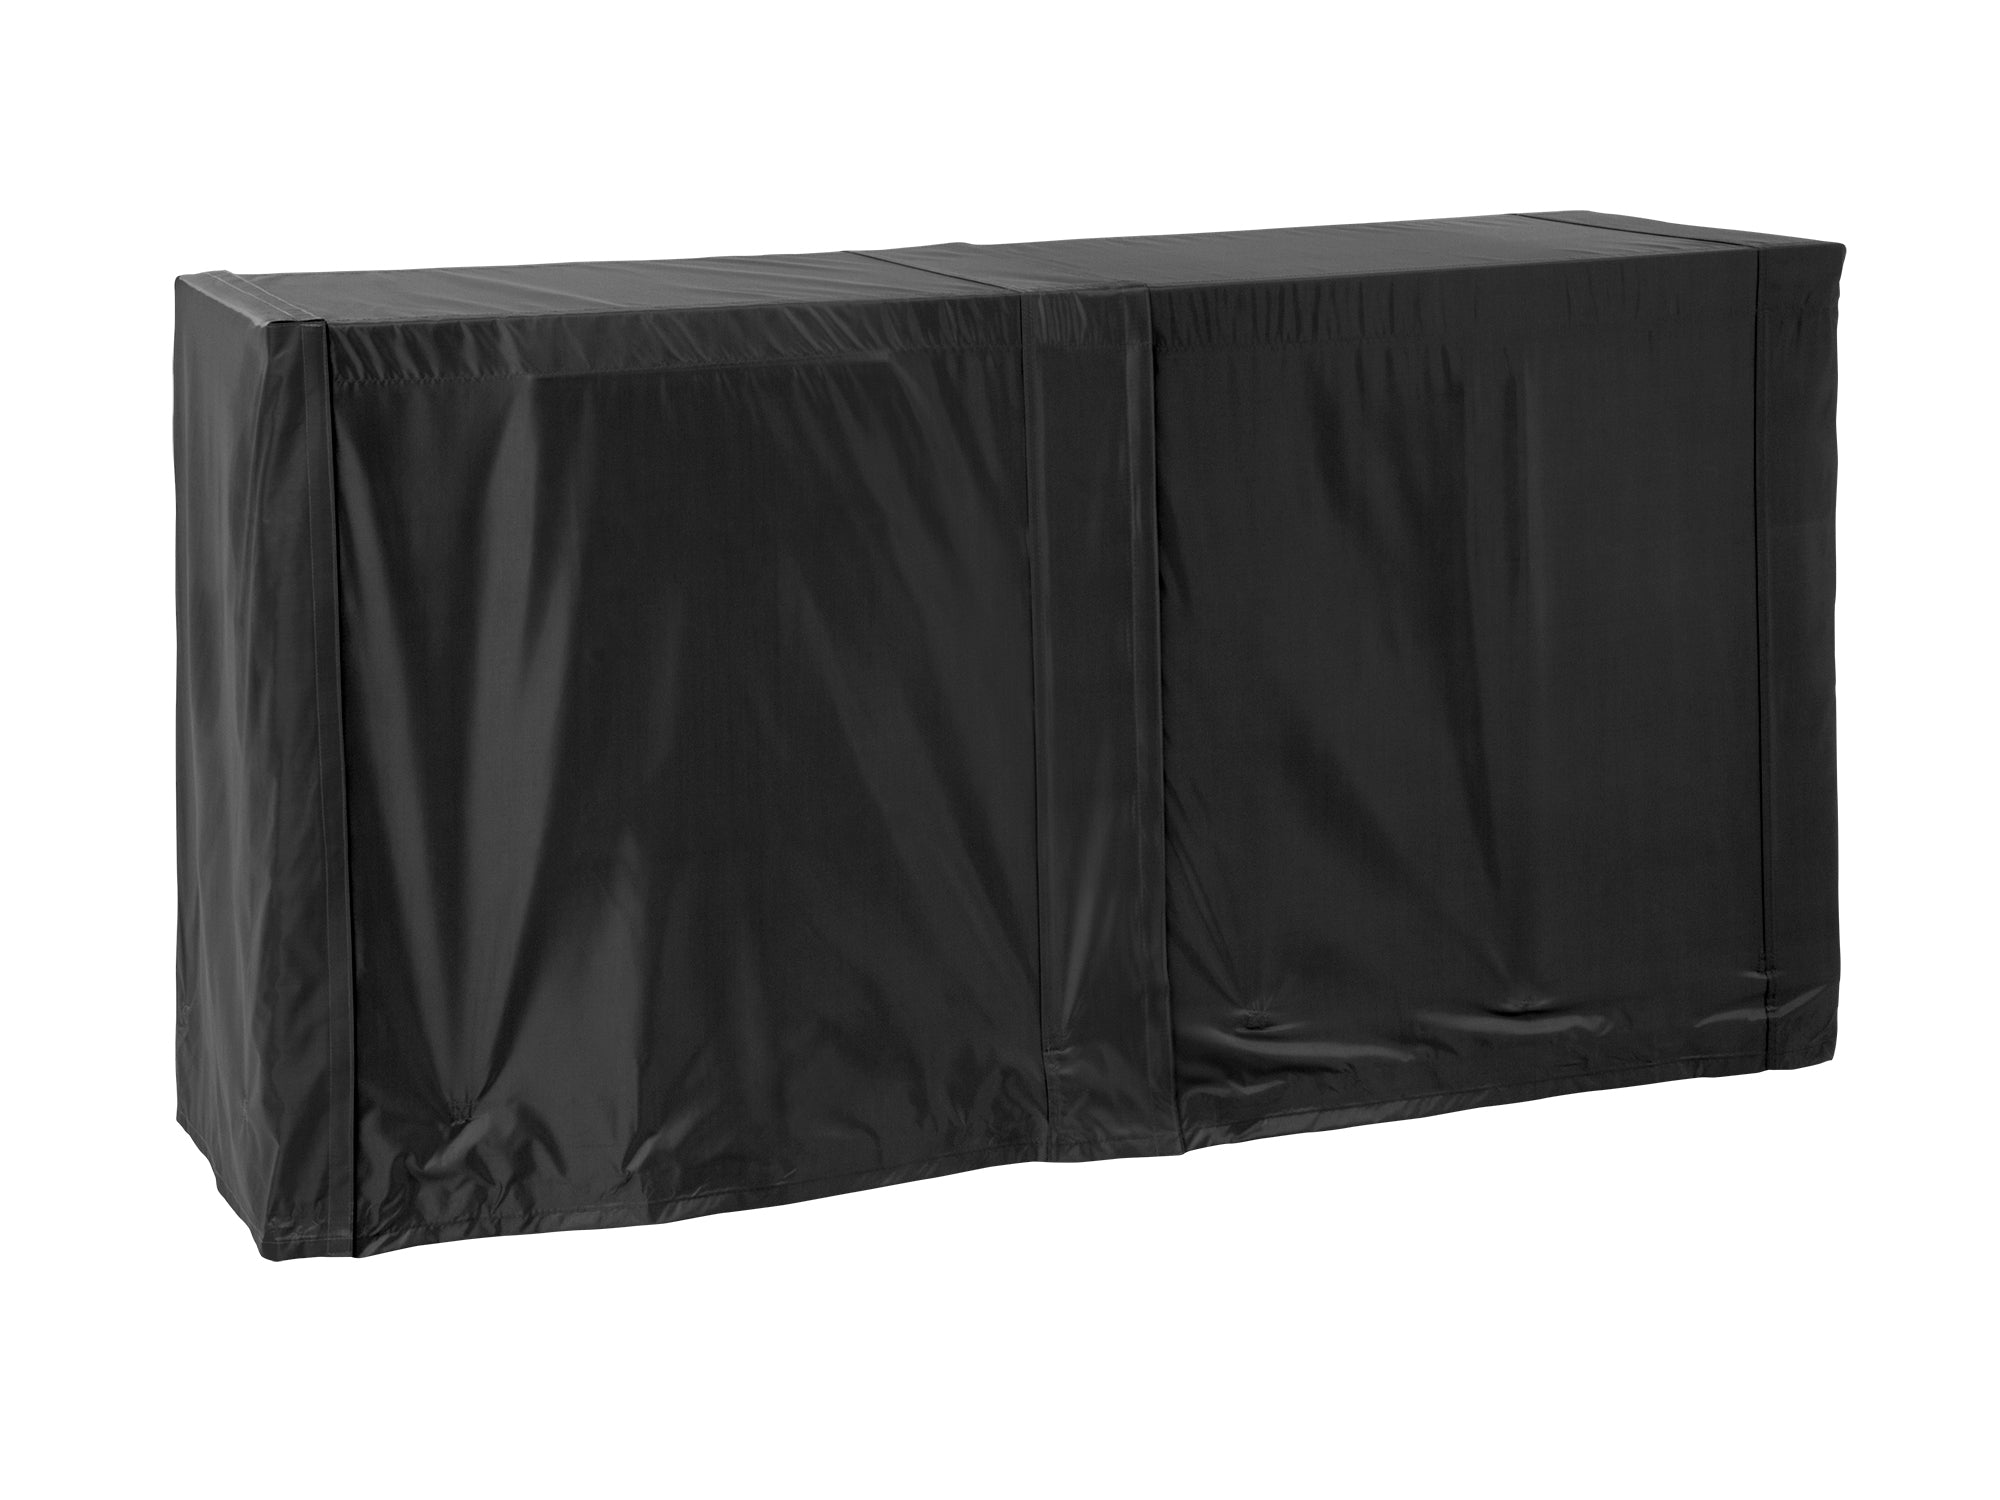 Outdoor Kitchen All-Season Cover Bundle: 32 in. Cover, 88 in. Cover, 90 Degree Corner Cover, Right/Left Side Panel Covers